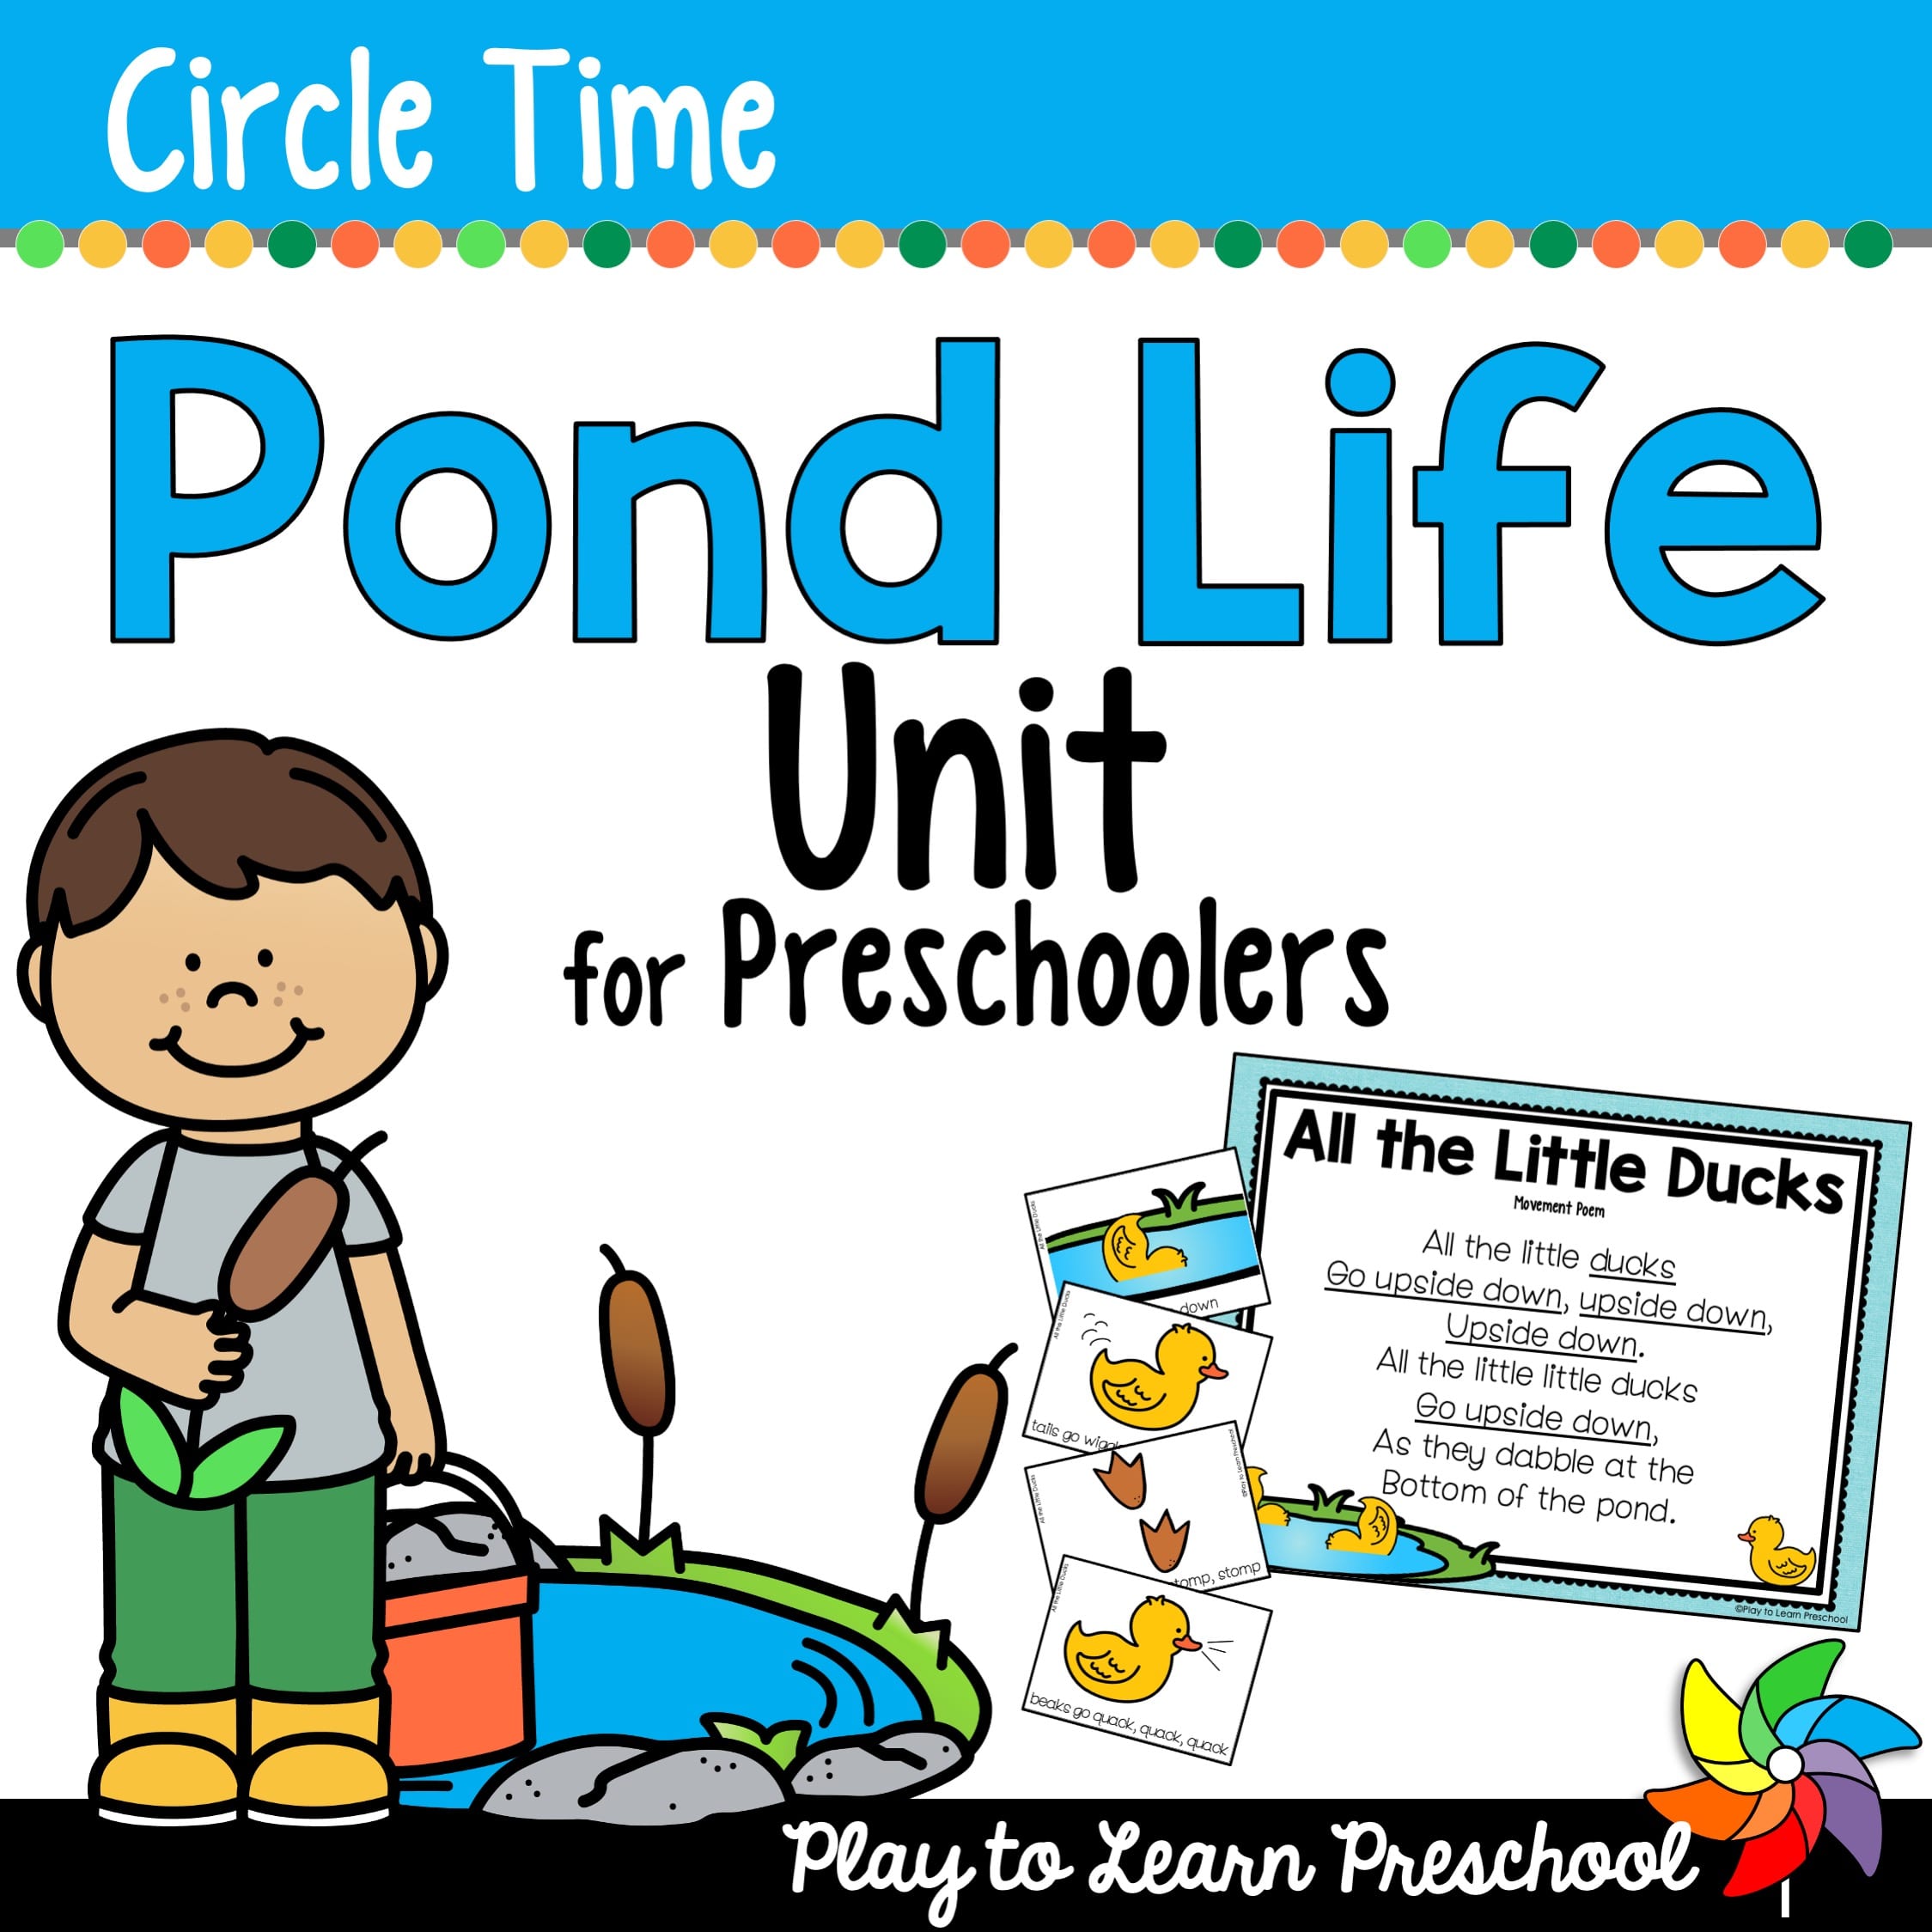 Pond Life Preschool Unit for Circle Time - Play to Learn Preschool